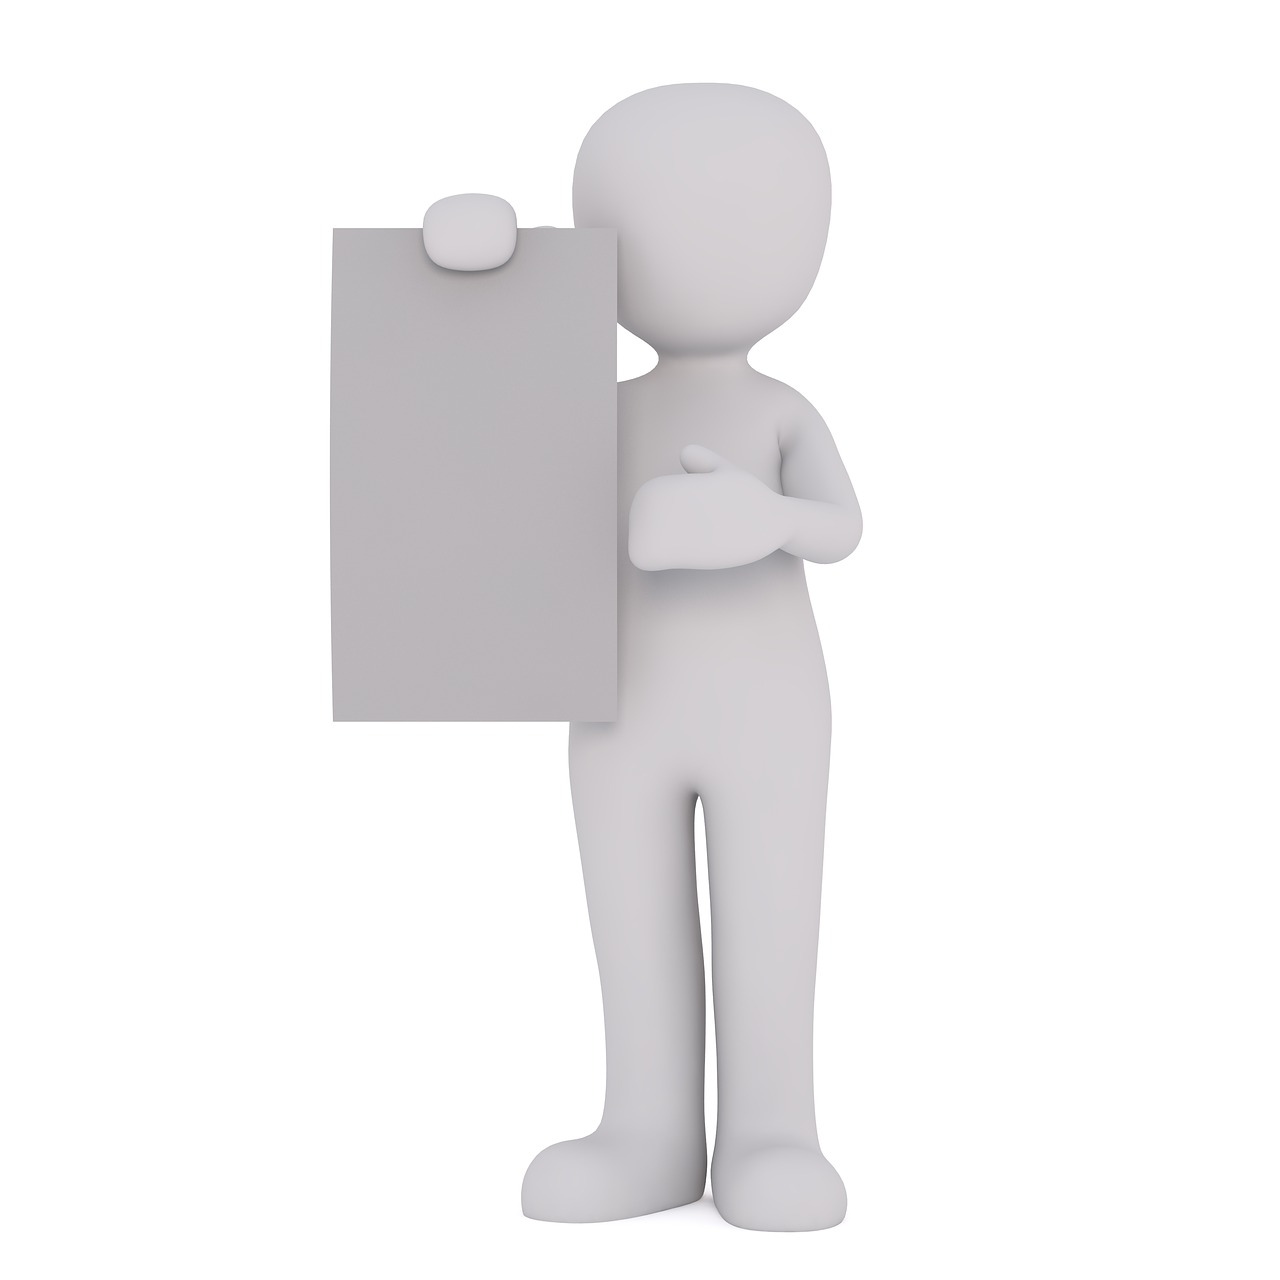 a person holding a blank sign on a white background, by Joseph Henderson, trending on pixabay, conceptual art, gray anthropomorphic, restaurant menu photo, 3 d clay figure, writing on a clipboard